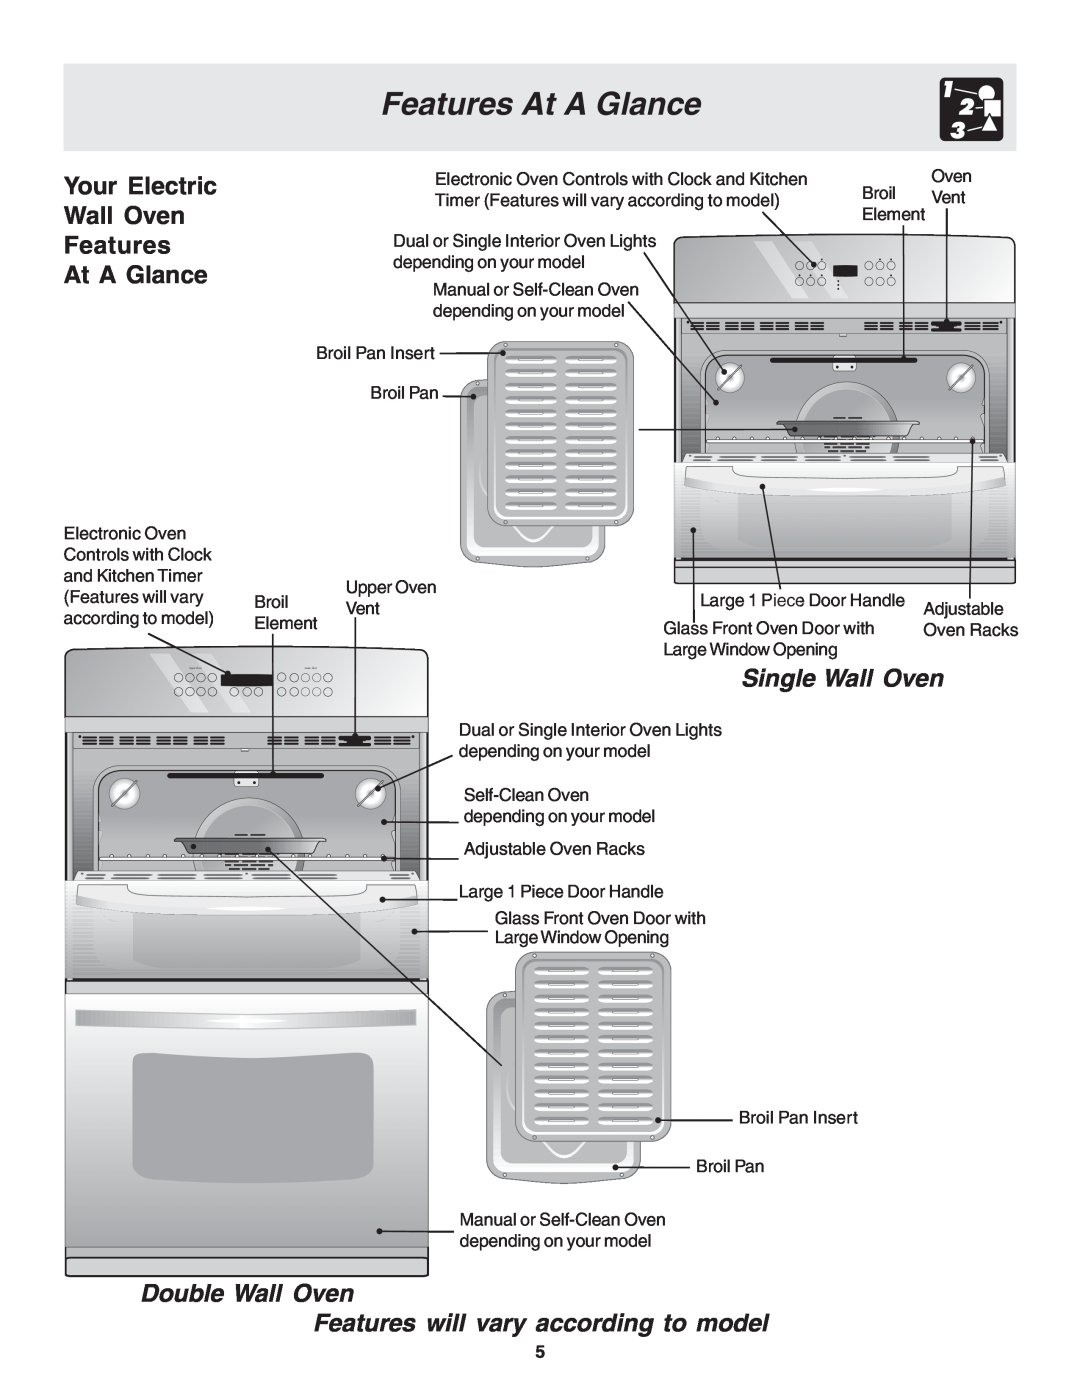 Frigidaire 318205103 manual Your Electric Wall Oven Features At A Glance, Single Wall Oven 